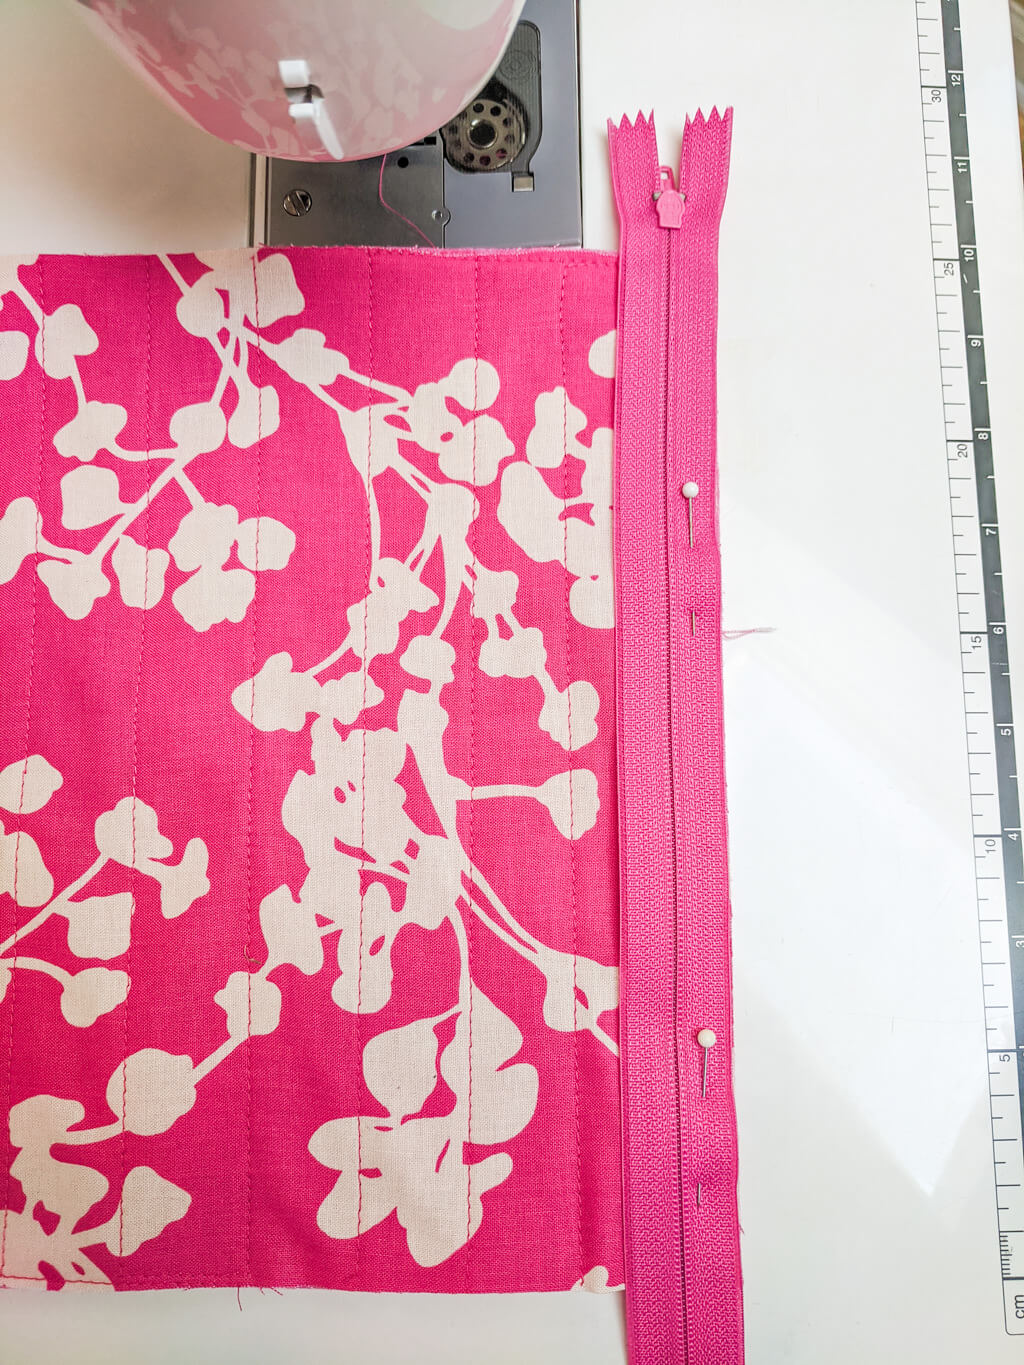 Sewing a zipper on a pencil case pouch